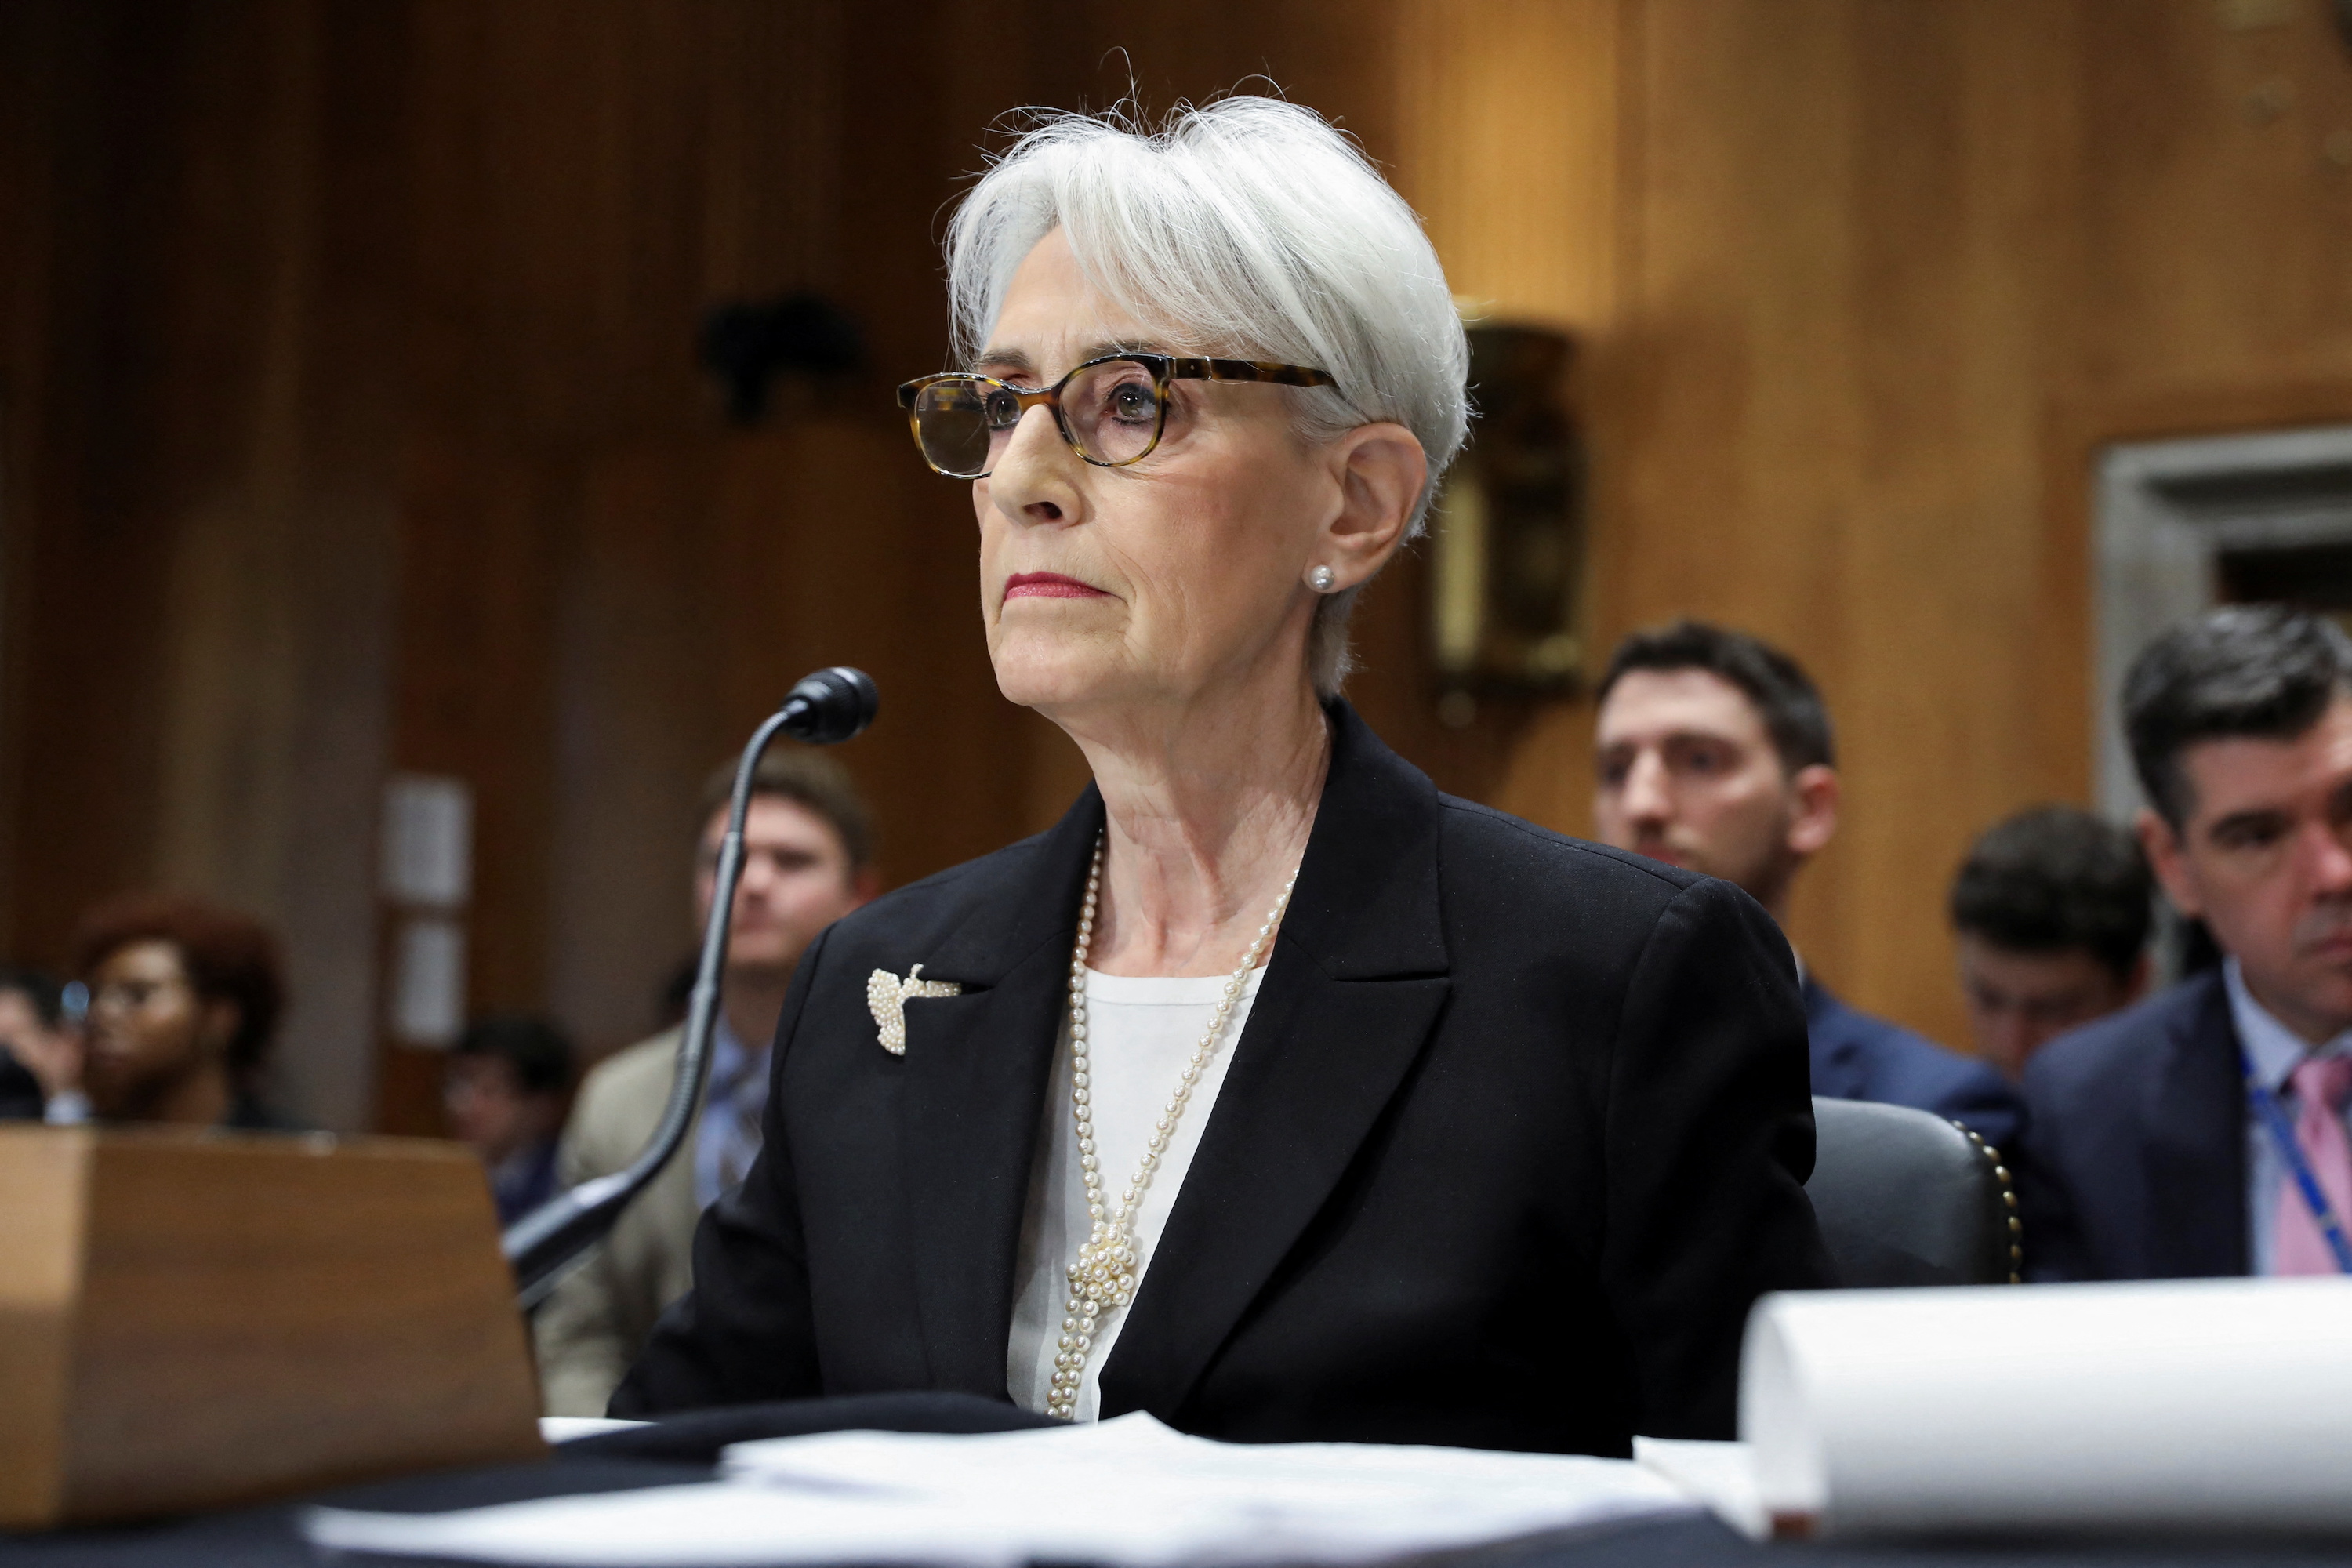 Deputy Secretary of State Wendy Sherman listens to lawmaker’ statements during a U.S. Senate Foreign Relations Committee hearing about at the government's policy towards China in “the era of strategic competition” at the U.S. Capitol in Washington, U.S., February 9, 2023.